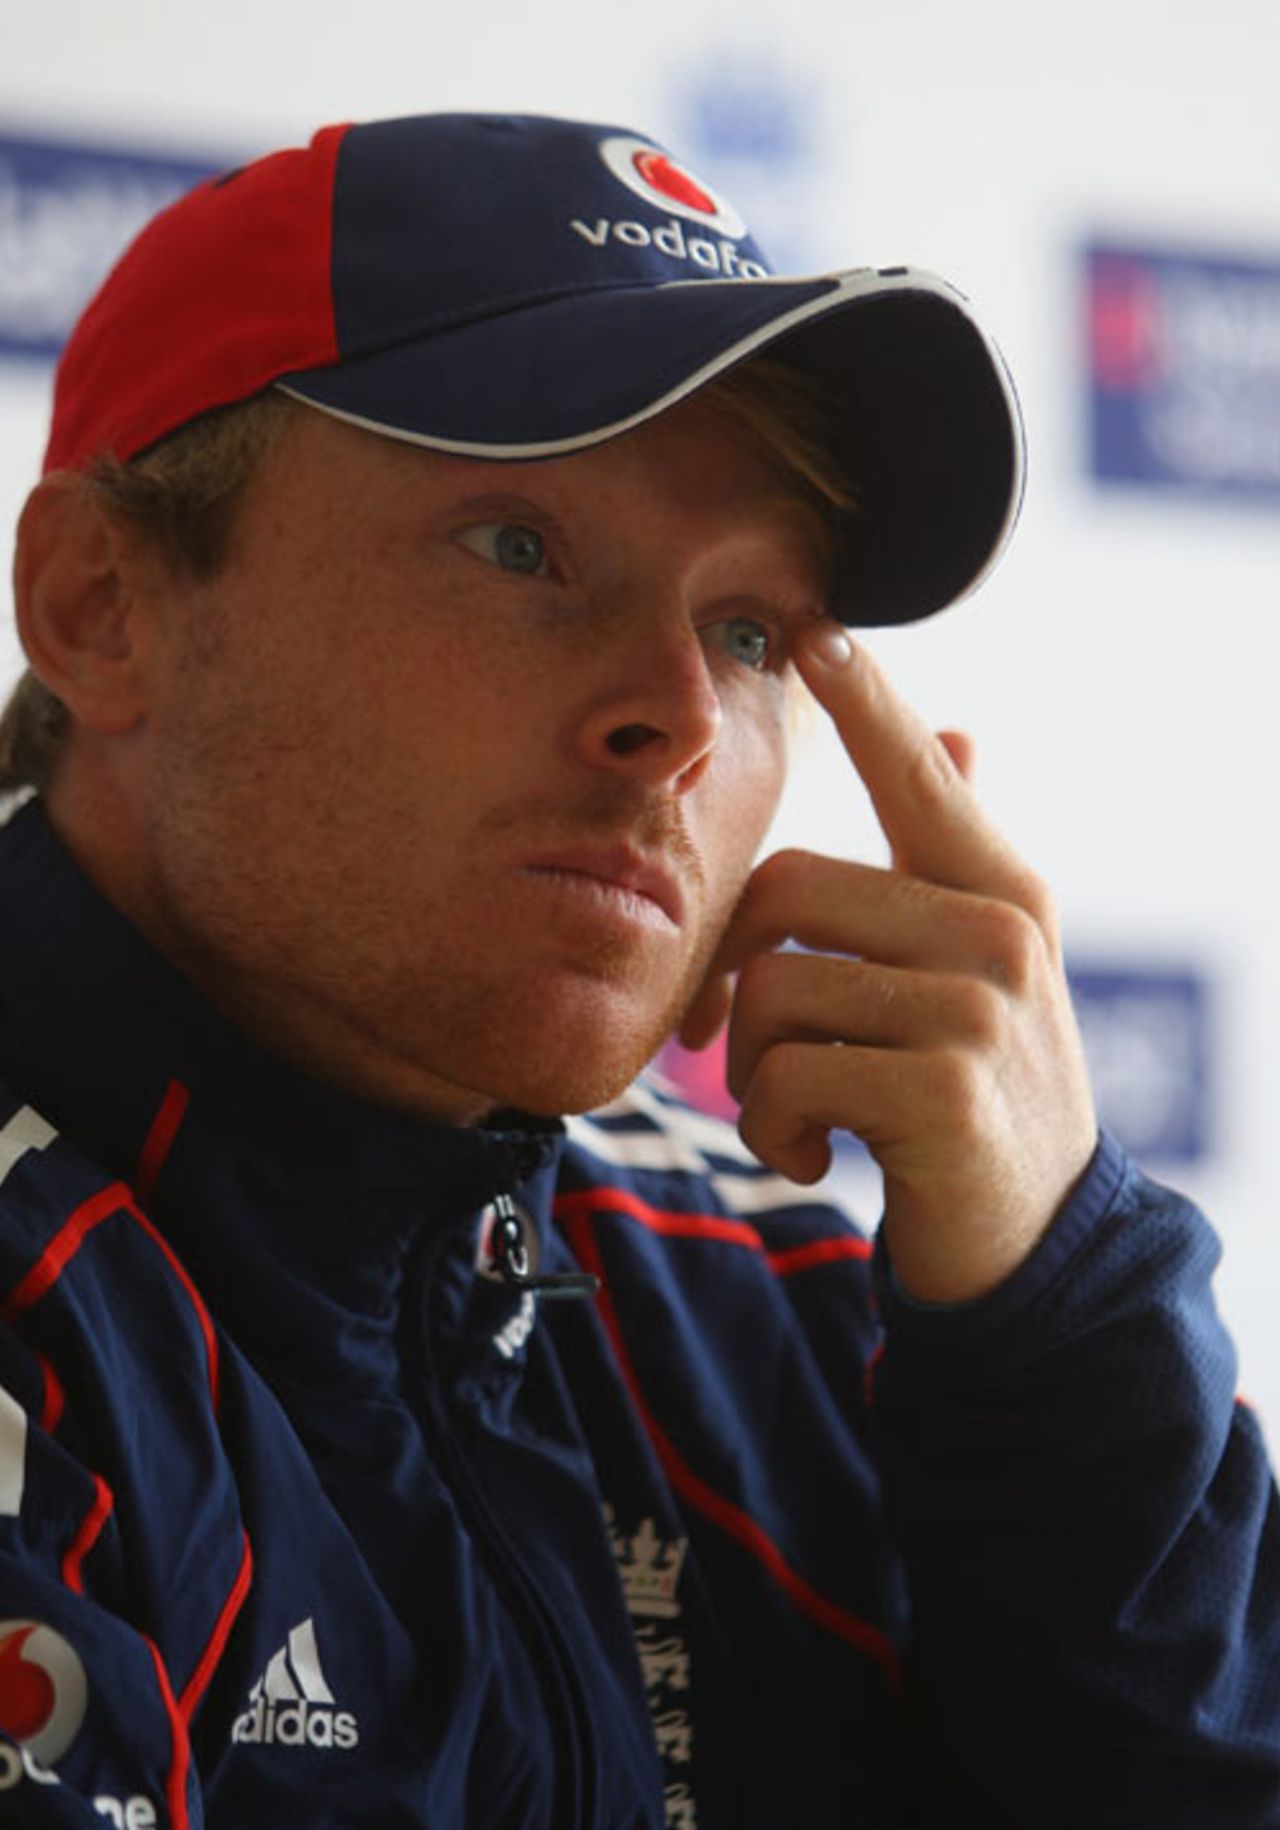 Ian Bell faces the press as England aim for a 5-0 whitewash over South Africa, England v South Africa, 5th ODI, Cardiff, September 2, 2008